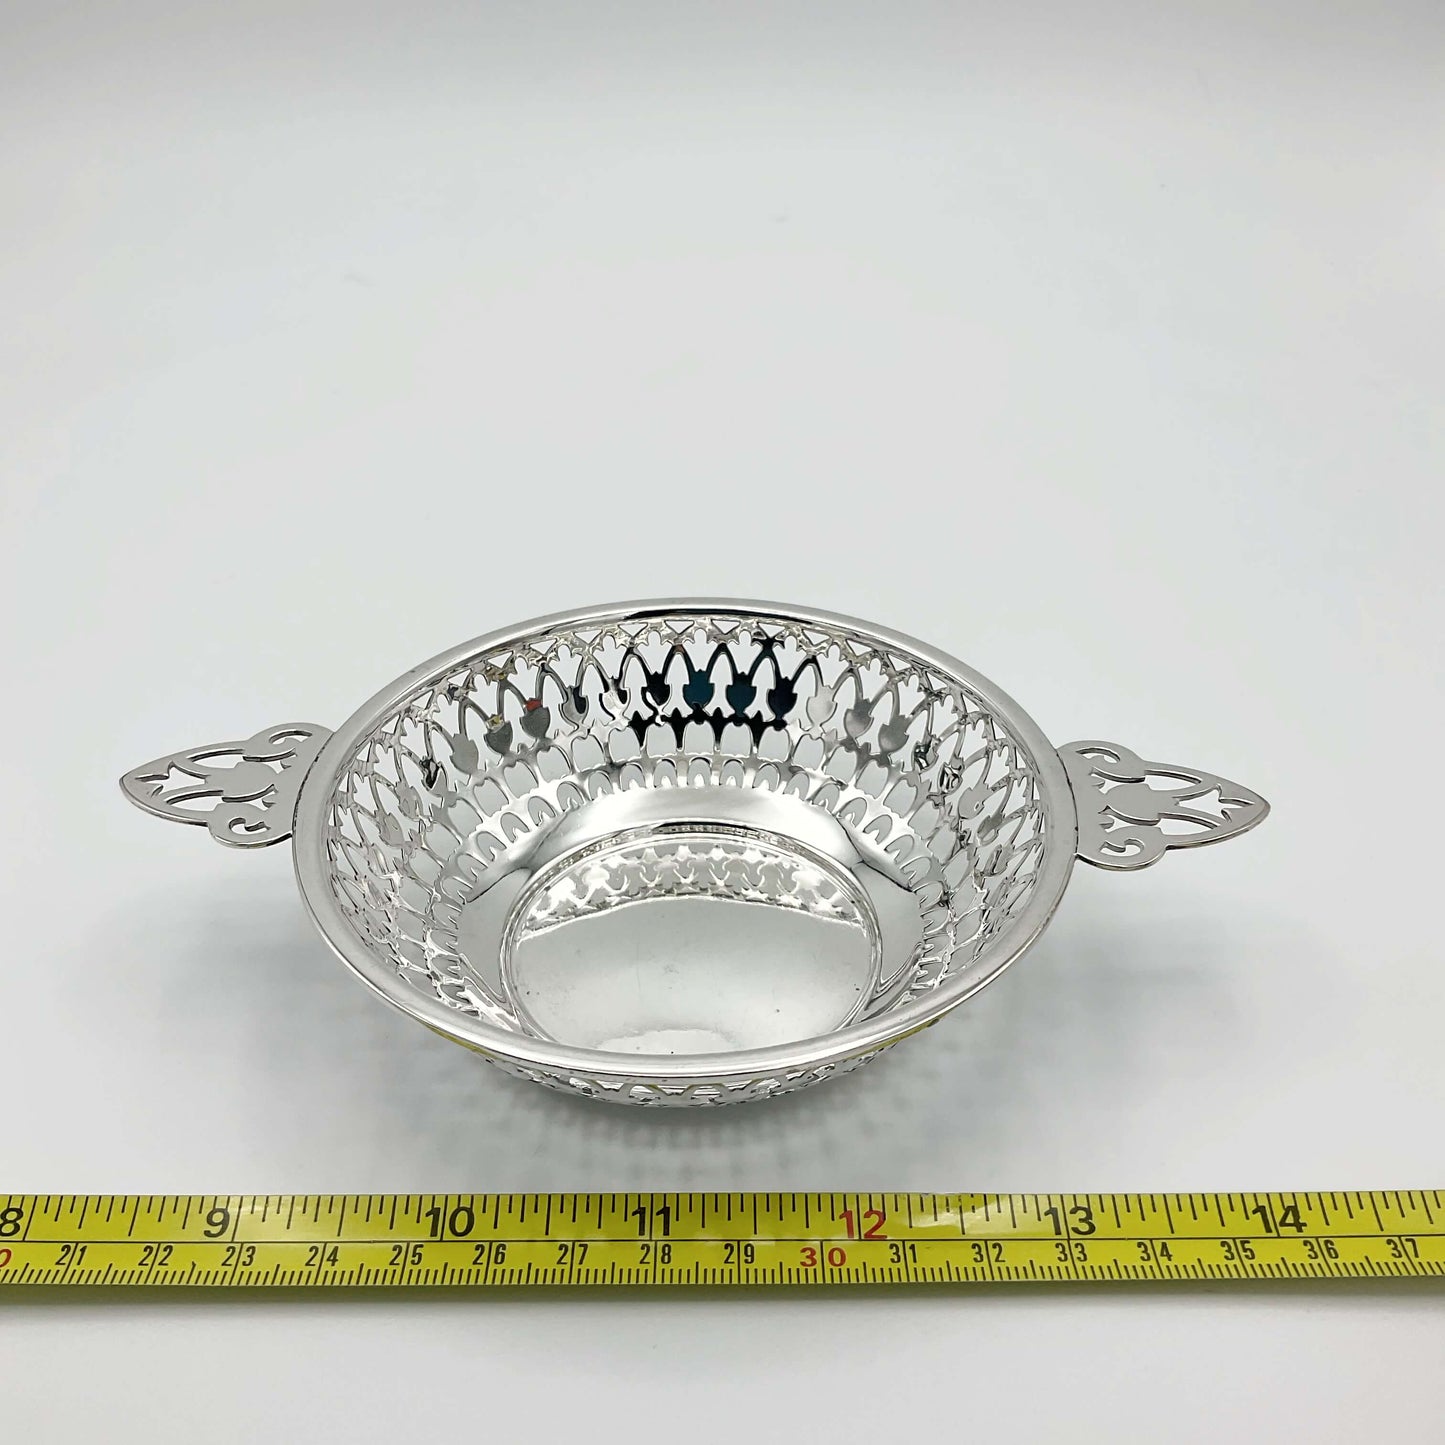 Shiny silver pierced bowl with handles next to tape measure showing width approximately 15cm